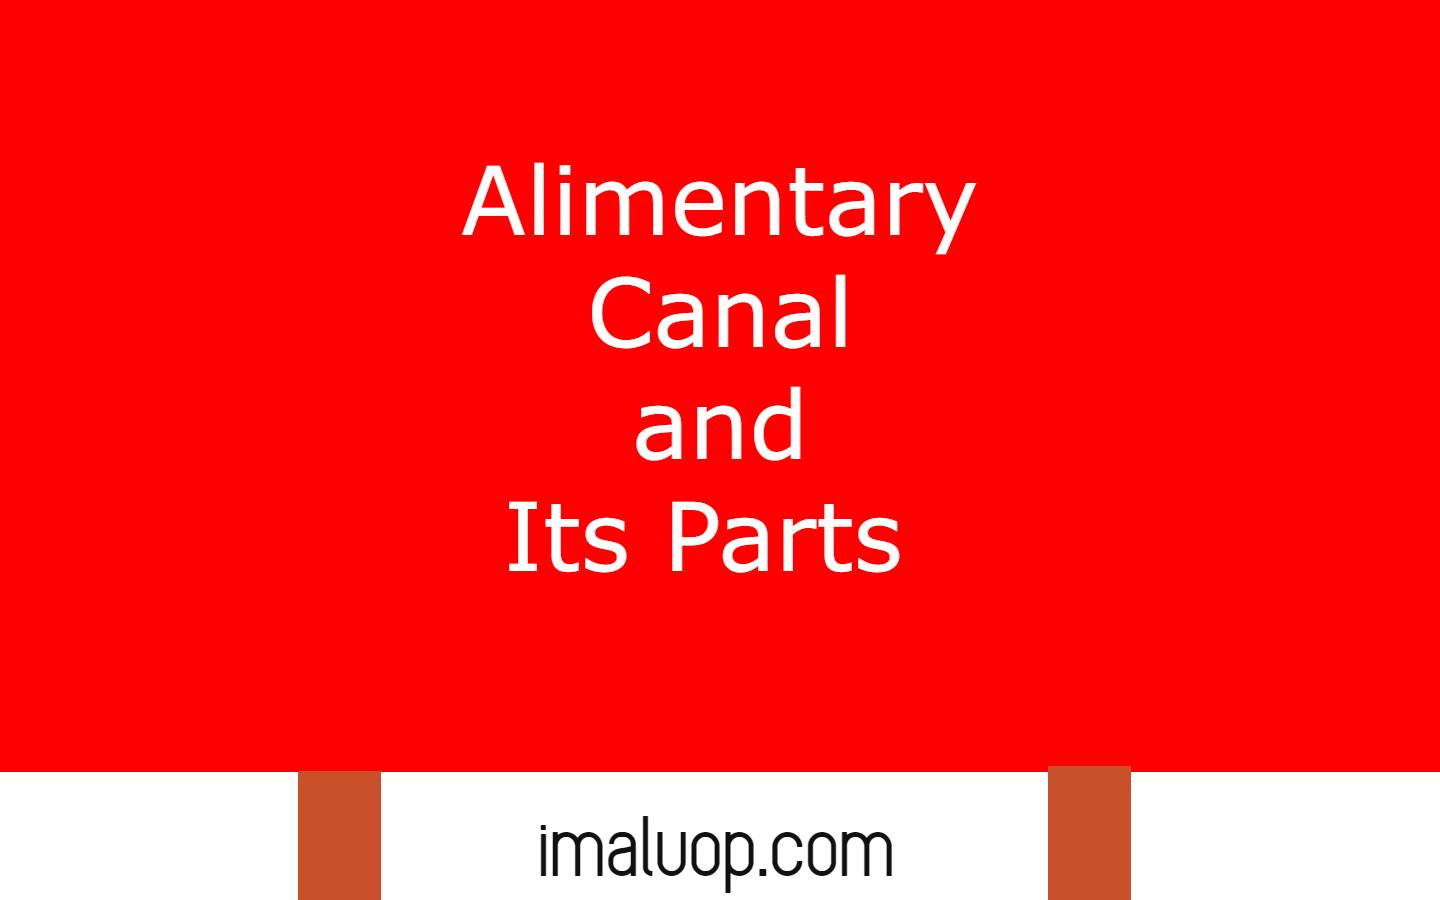 Alimentary Canal and Its Parts